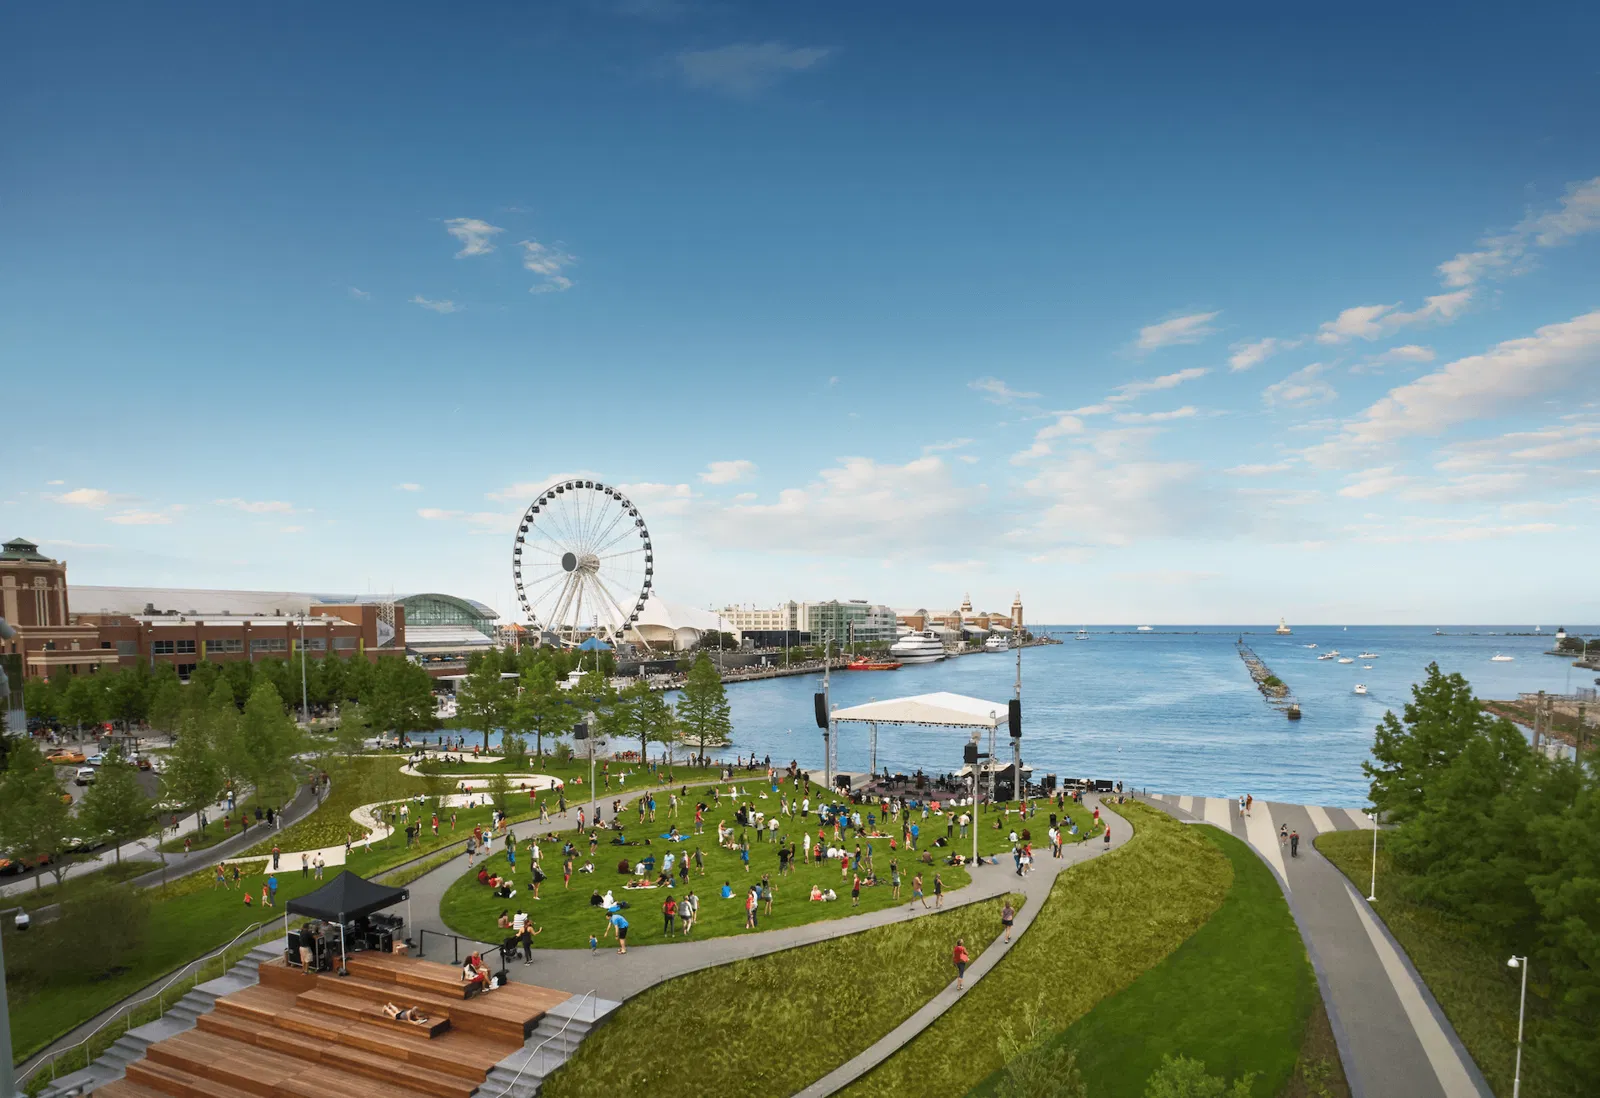 Overview photo of event at Navy Pier: green grass, stage, sun, sea and ferris wheel at the background